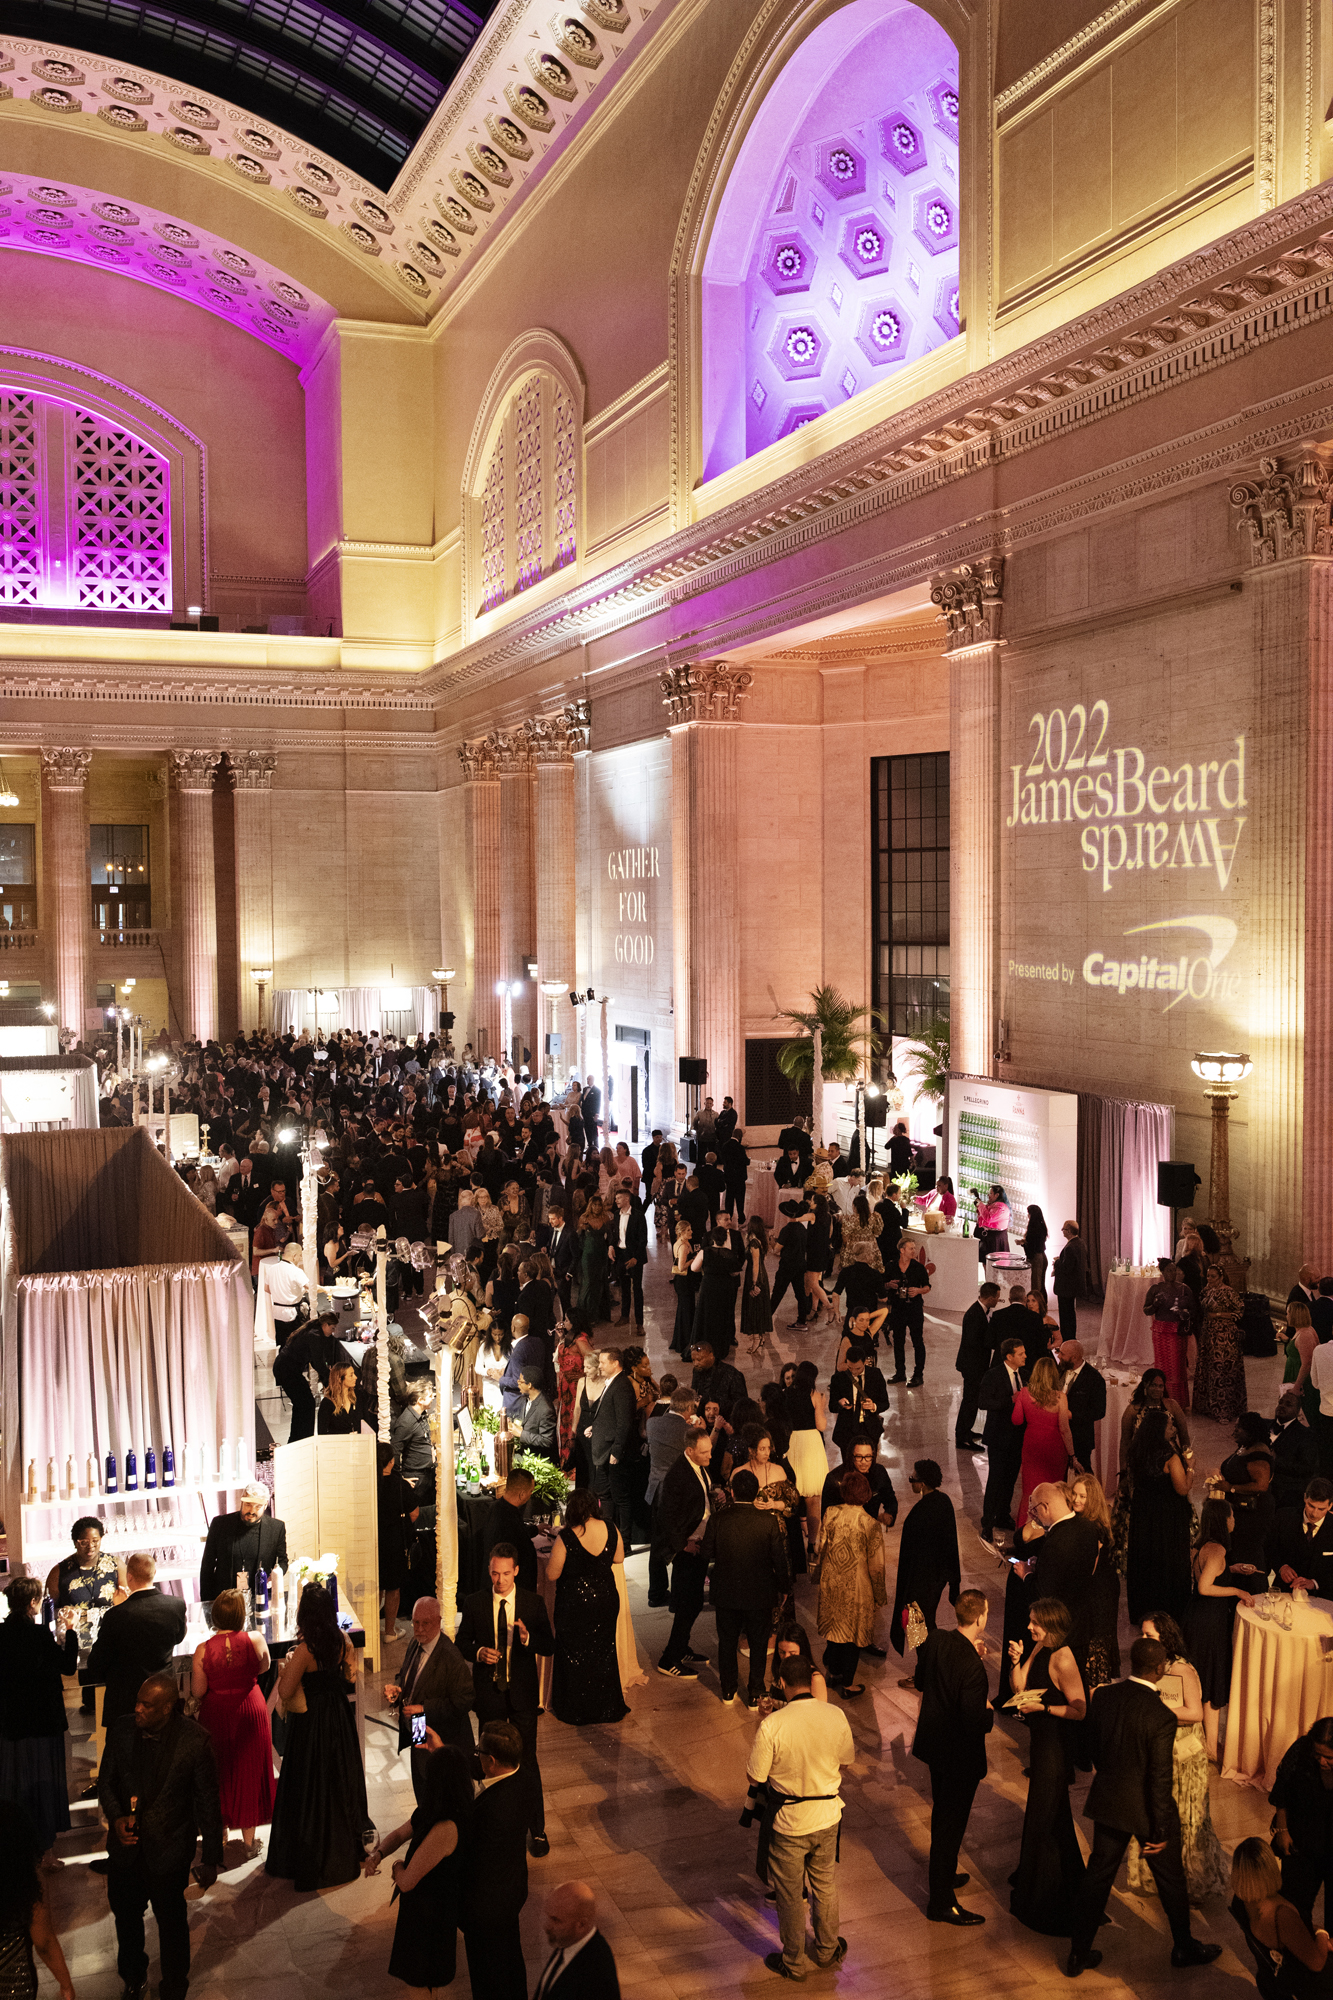 The 2023 James Beard Awards will be given out at a glitzy gala in Chicago in June. Winners receive silver medals—and often, a chance to capitalize upon their win with lucrative endorsements and book deals. (James Beard Foundation)